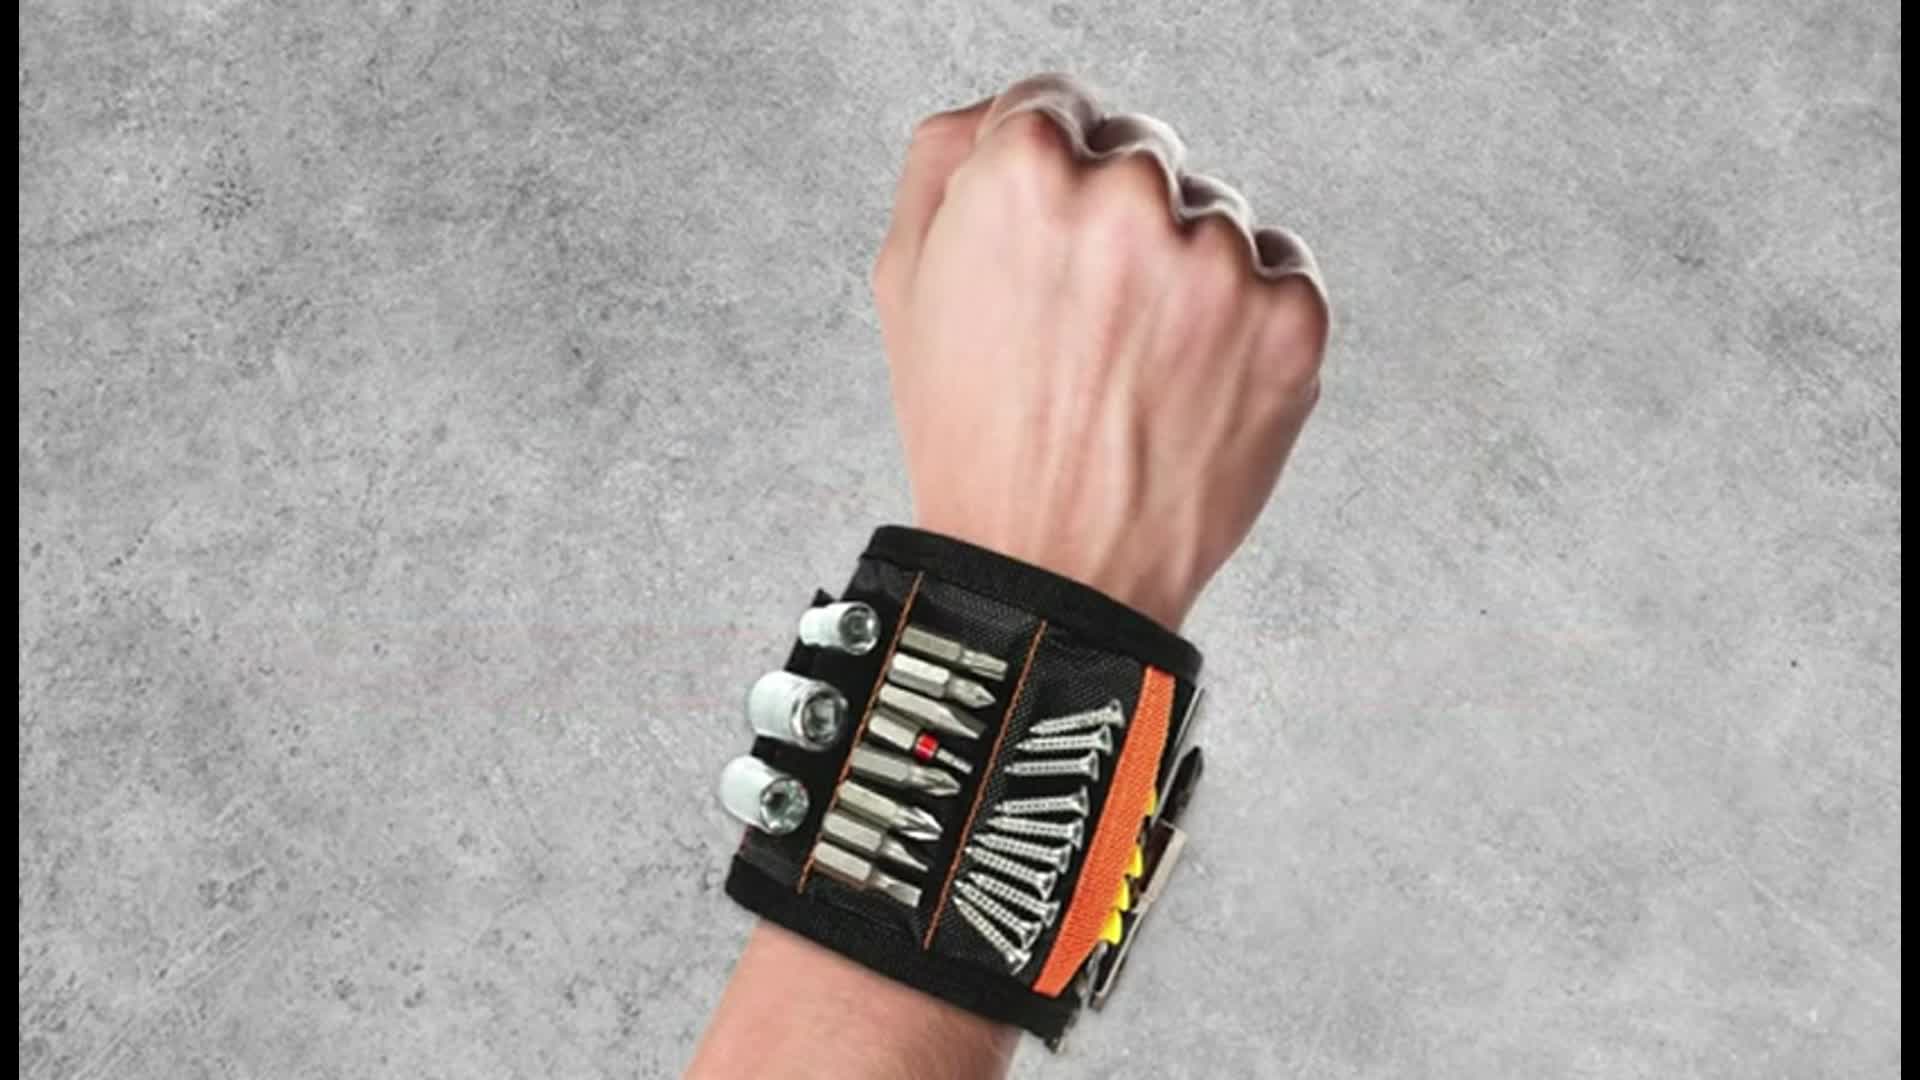 Stocking Stuffers for Men Tools - Magnetic Wristband for Holding Screws,  Tool Belt Gifts Ideas for Men Dad Fathers Him Birthday Christmas, Cool  Gifts